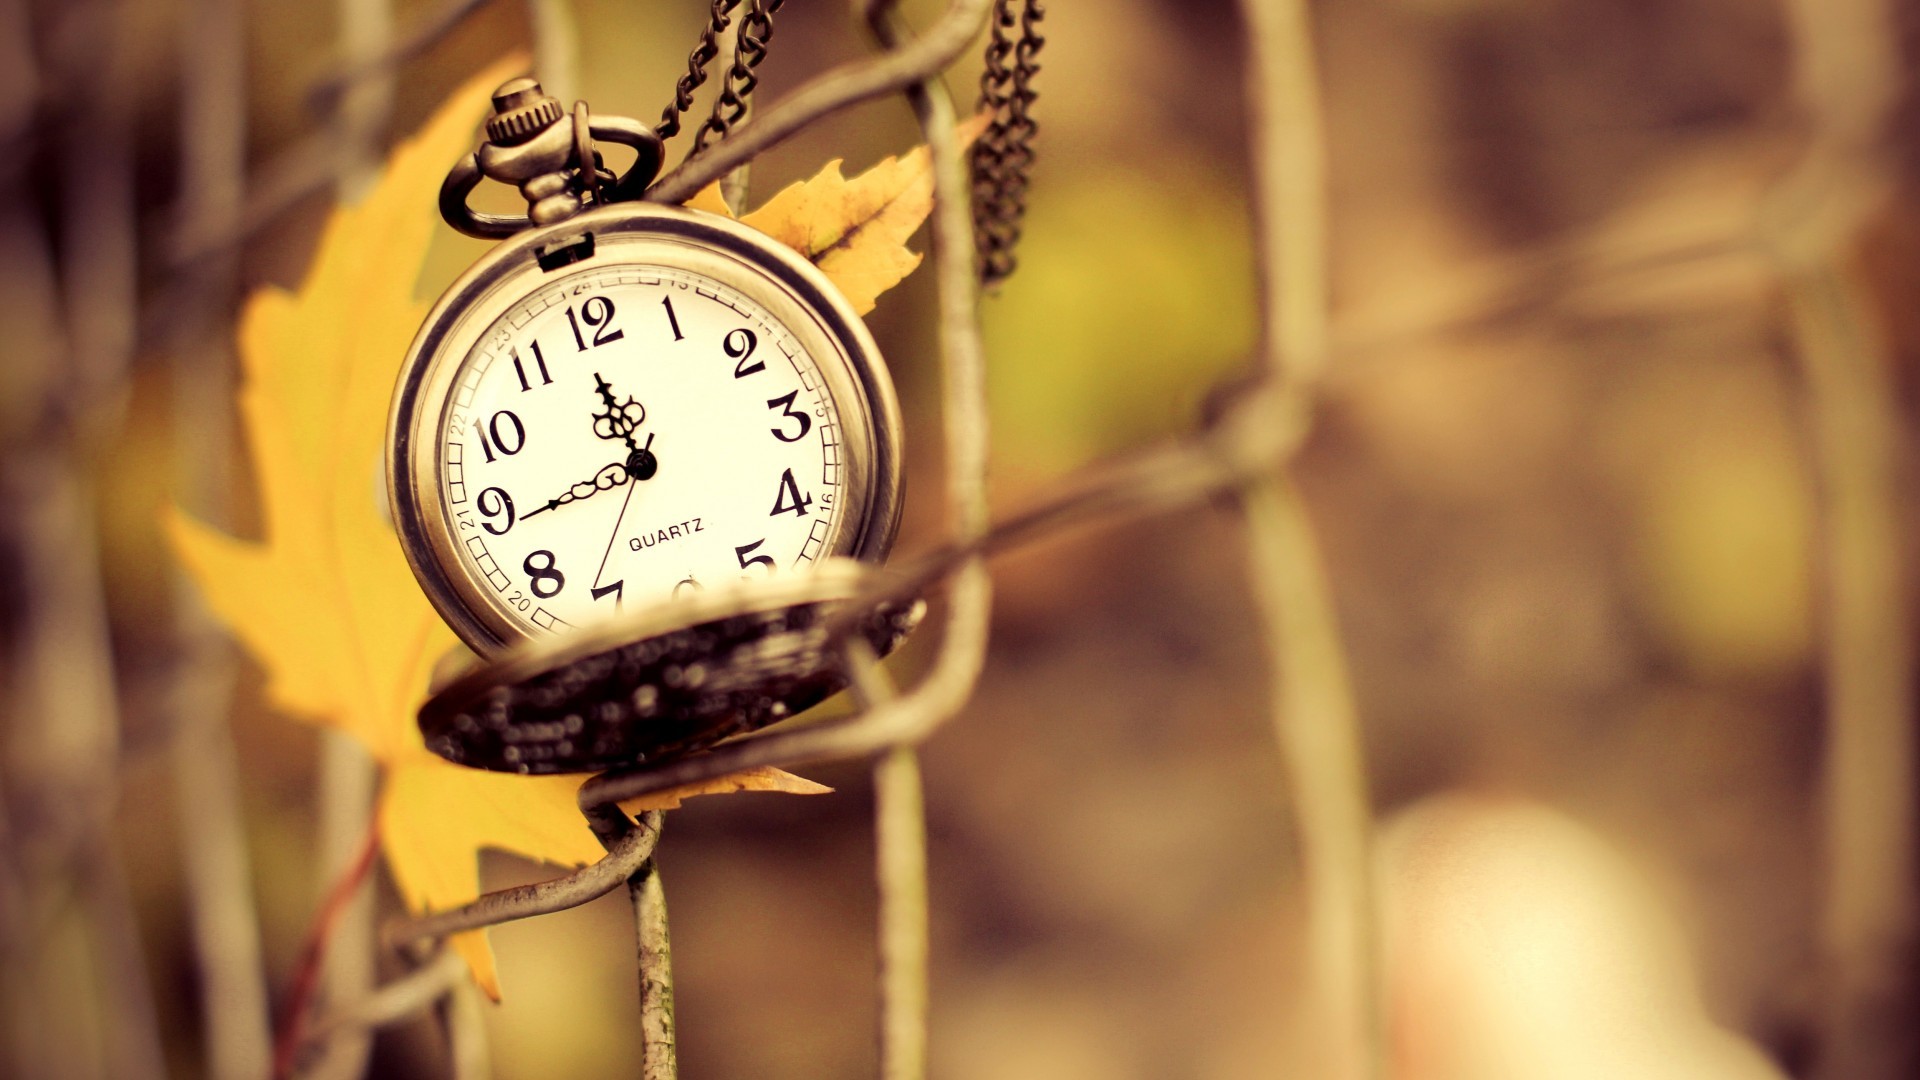 General 1920x1080 clocks fence depth of field leaves time pocket watch numbers